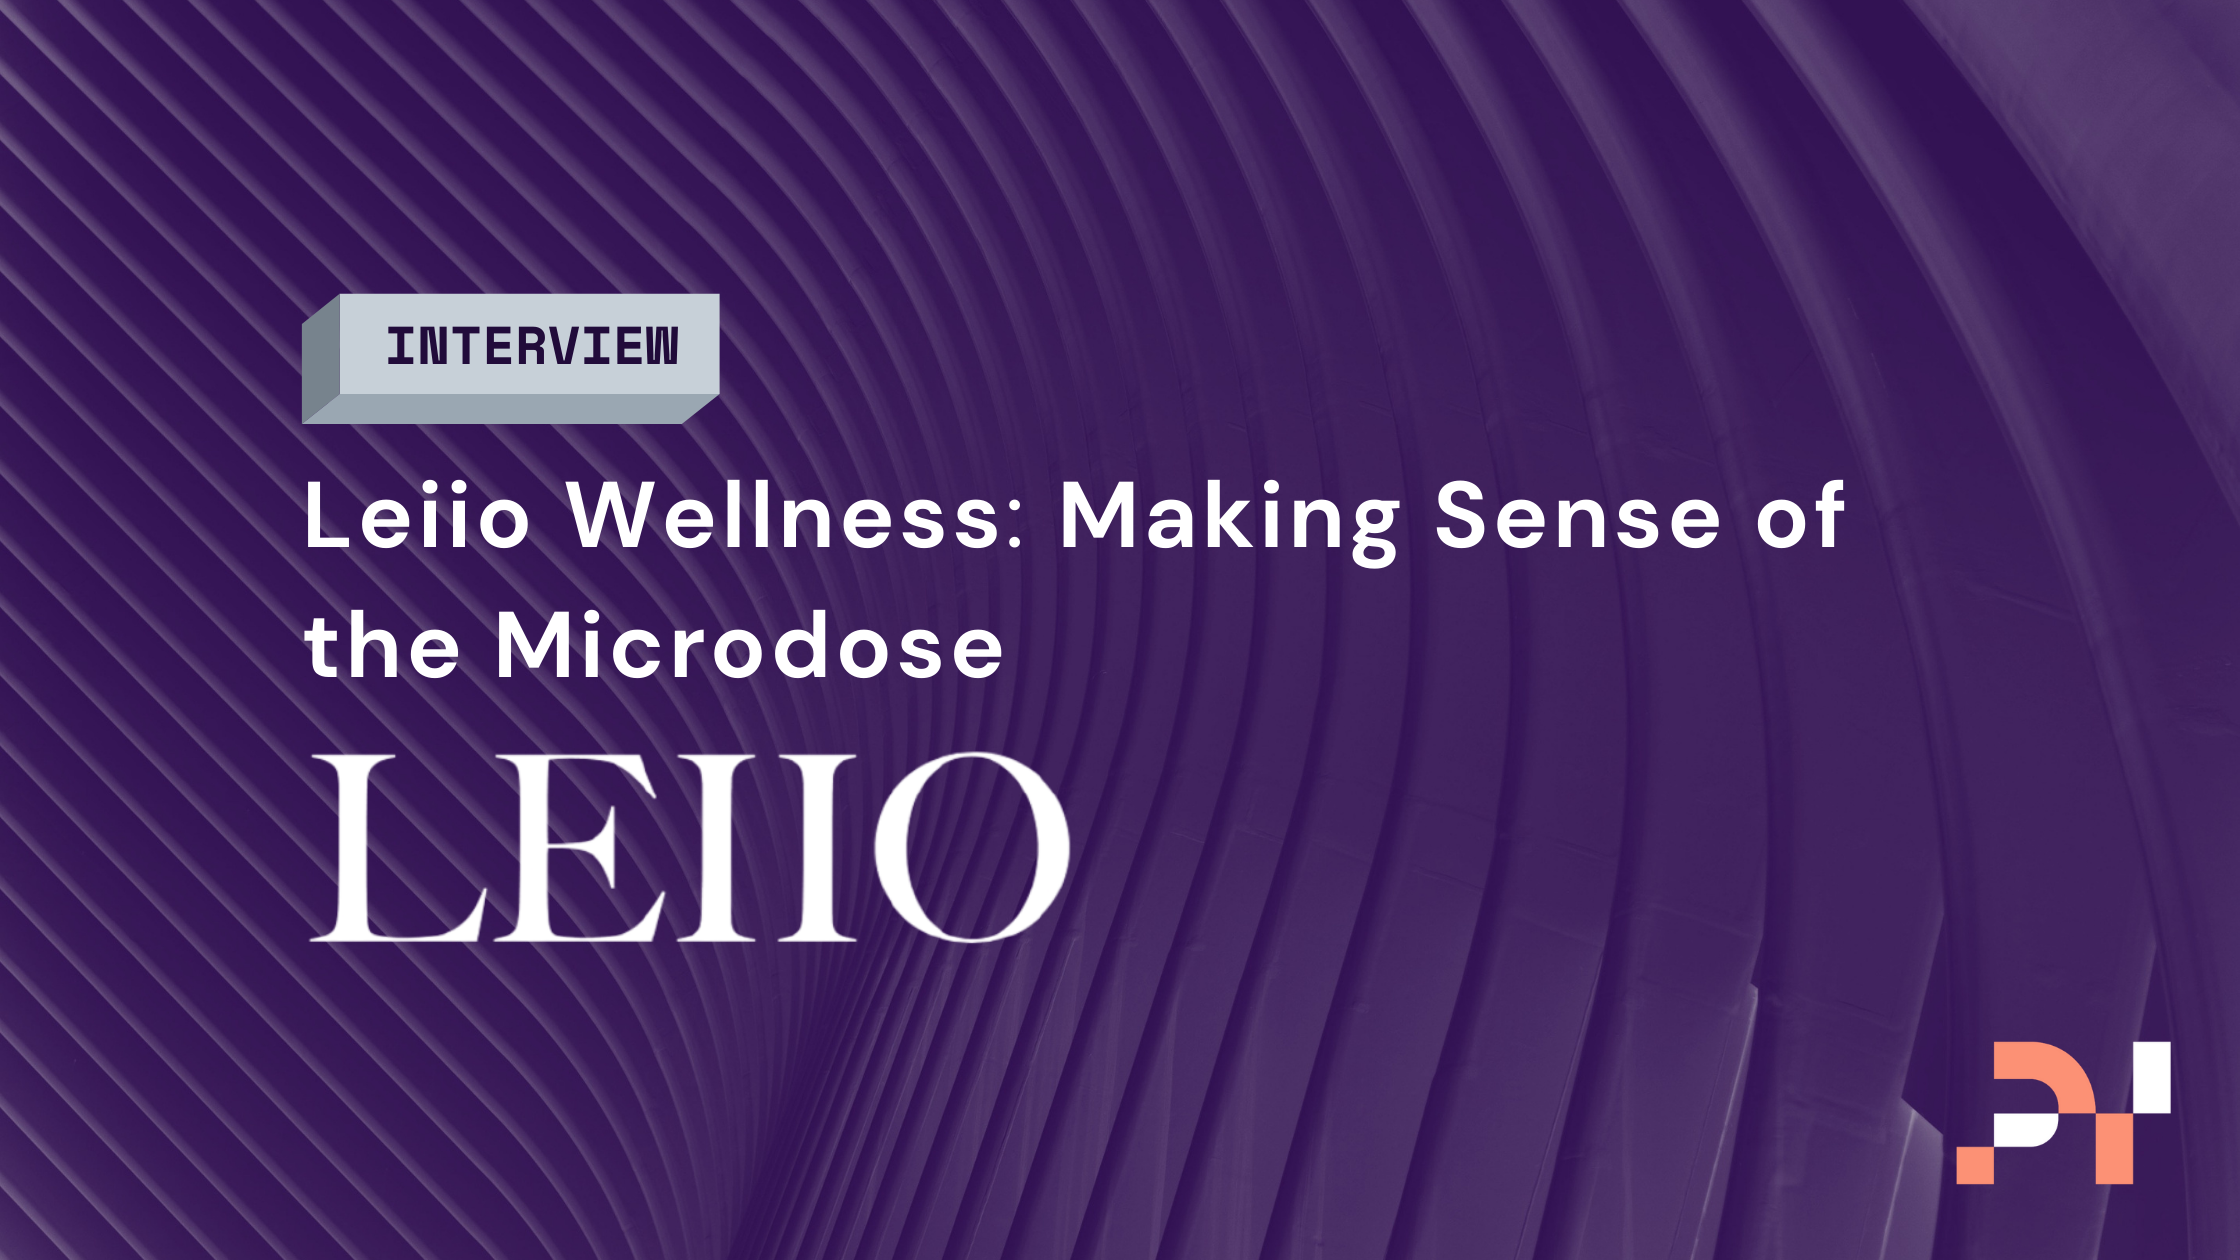 What does microdosing wellness mean?